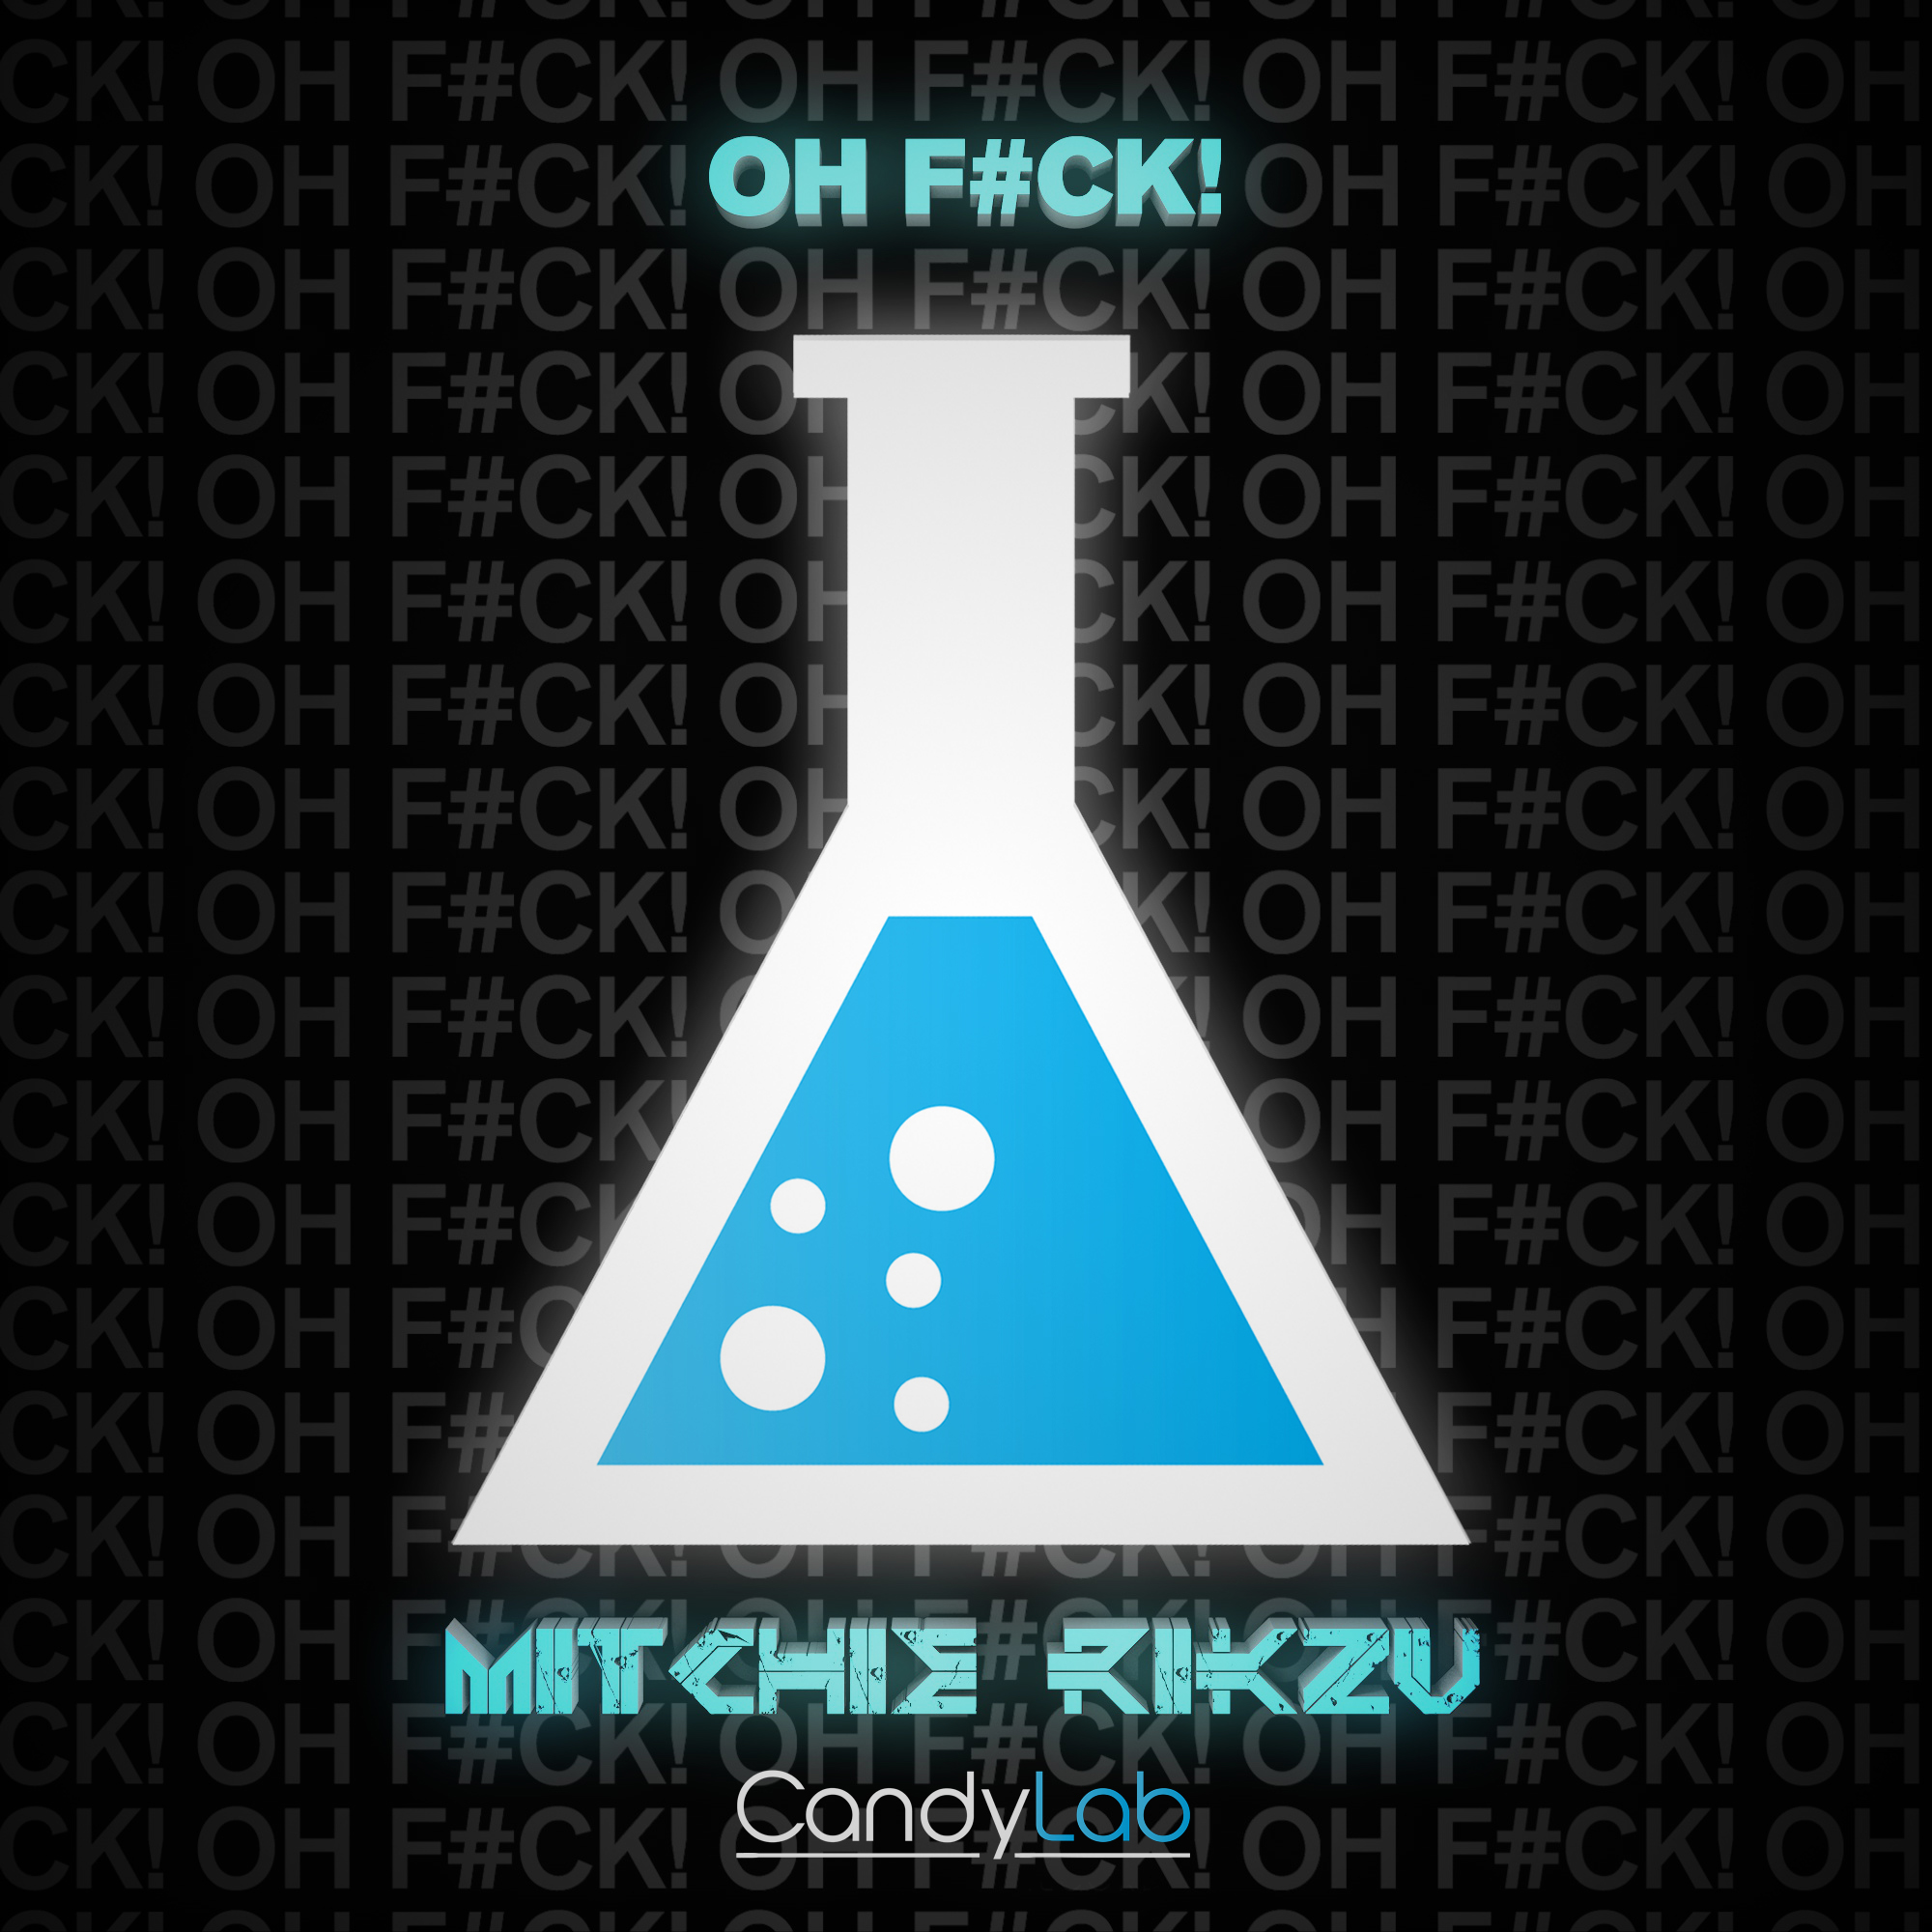 Mitchie Rikzu releases melodic new electro house single ‘Oh F#ck!’